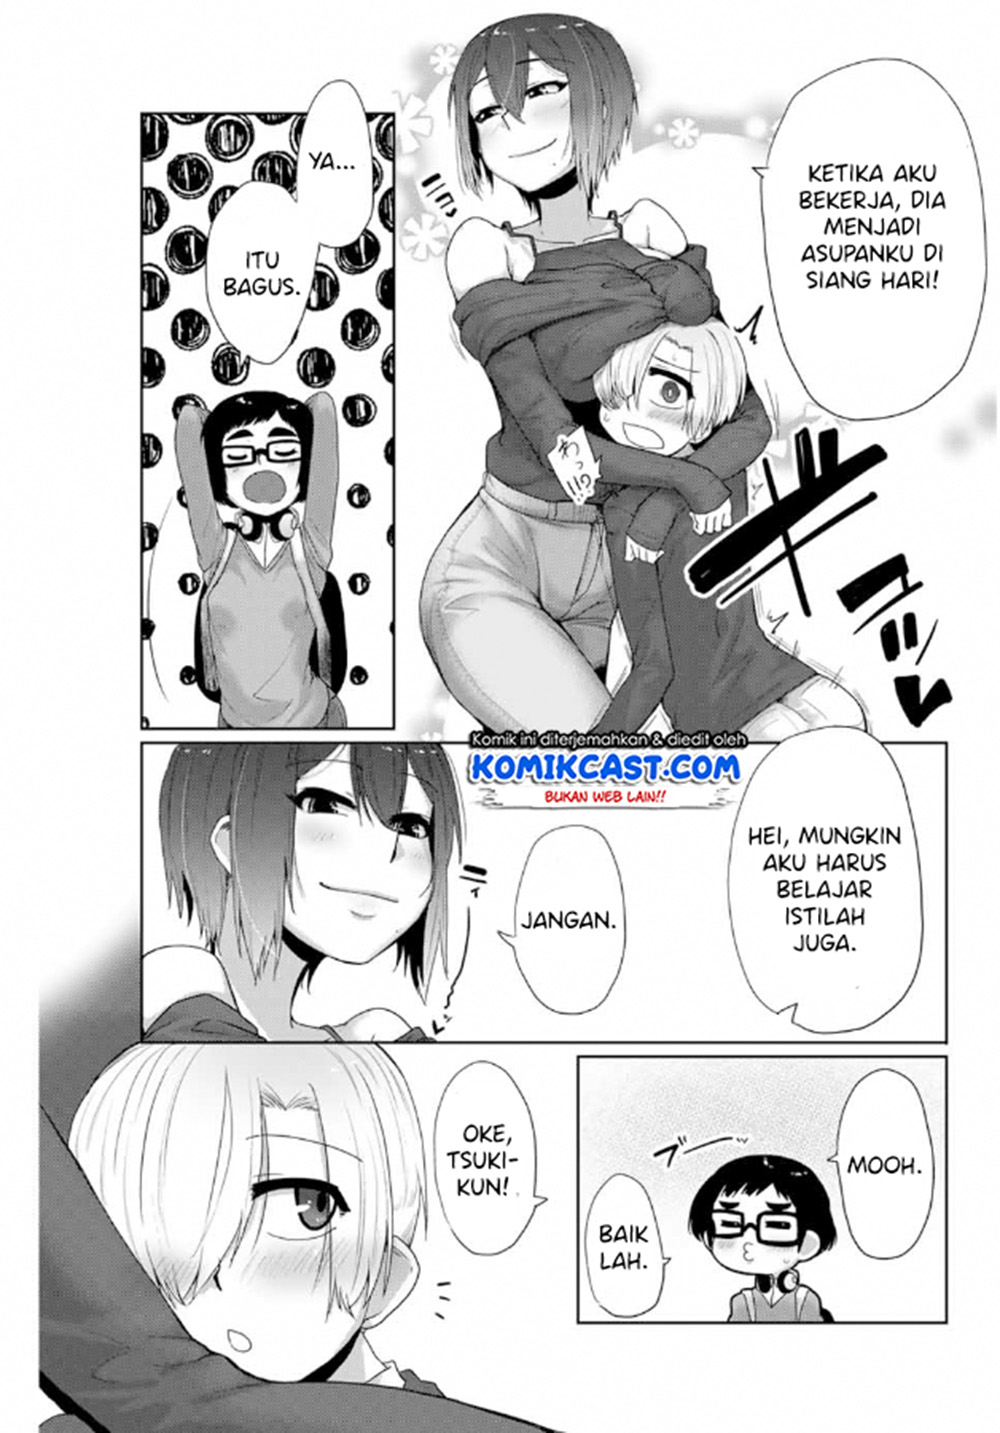 The Girl with a Kansai Accent and the Pure Boy Chapter 07 12